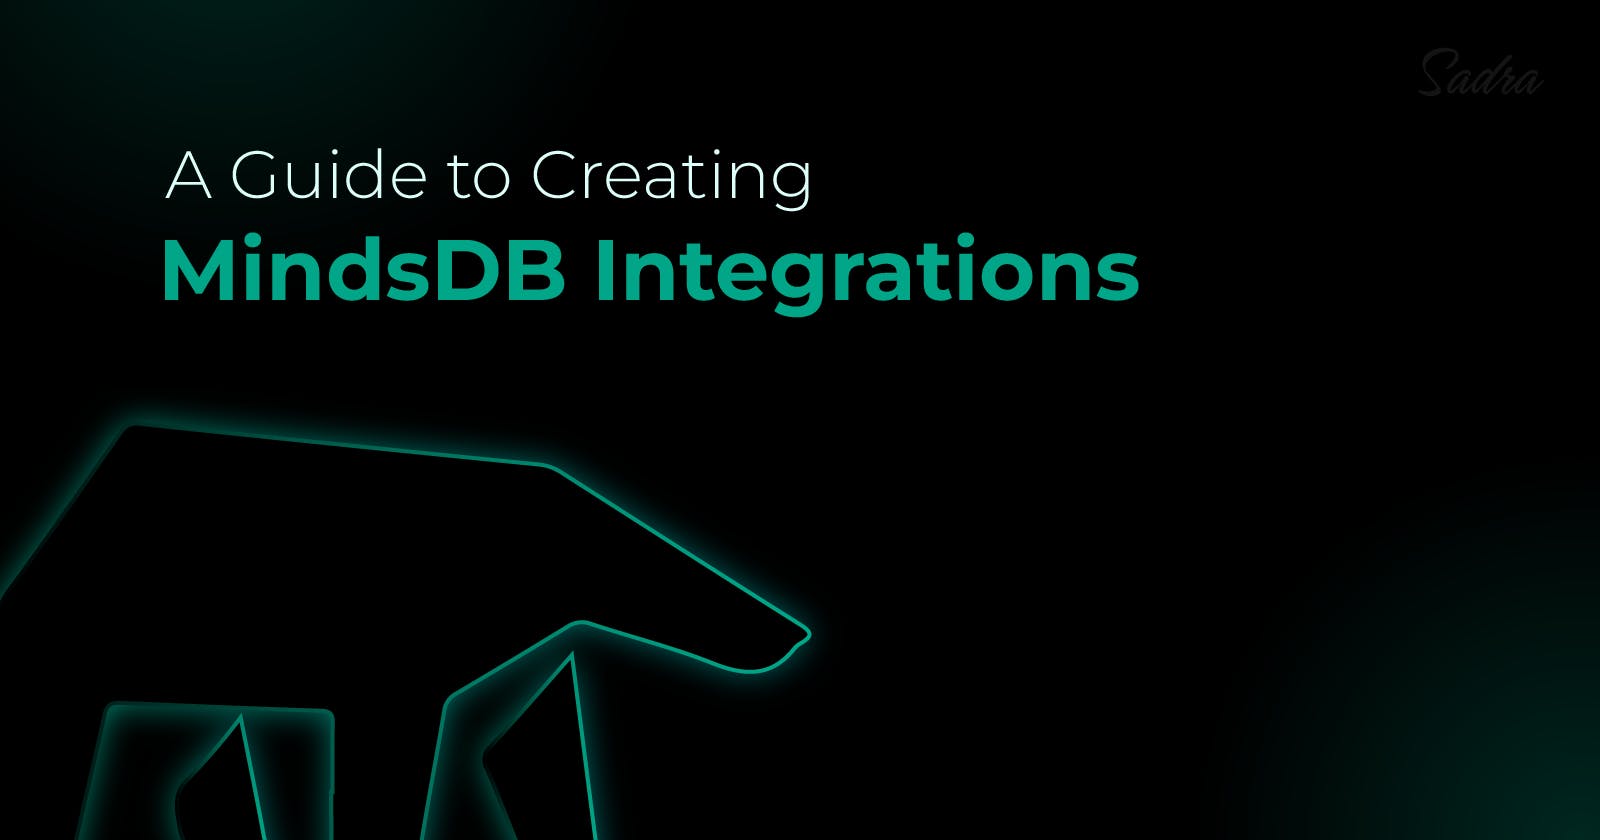 A Guide to Creating MindsDB Integrations